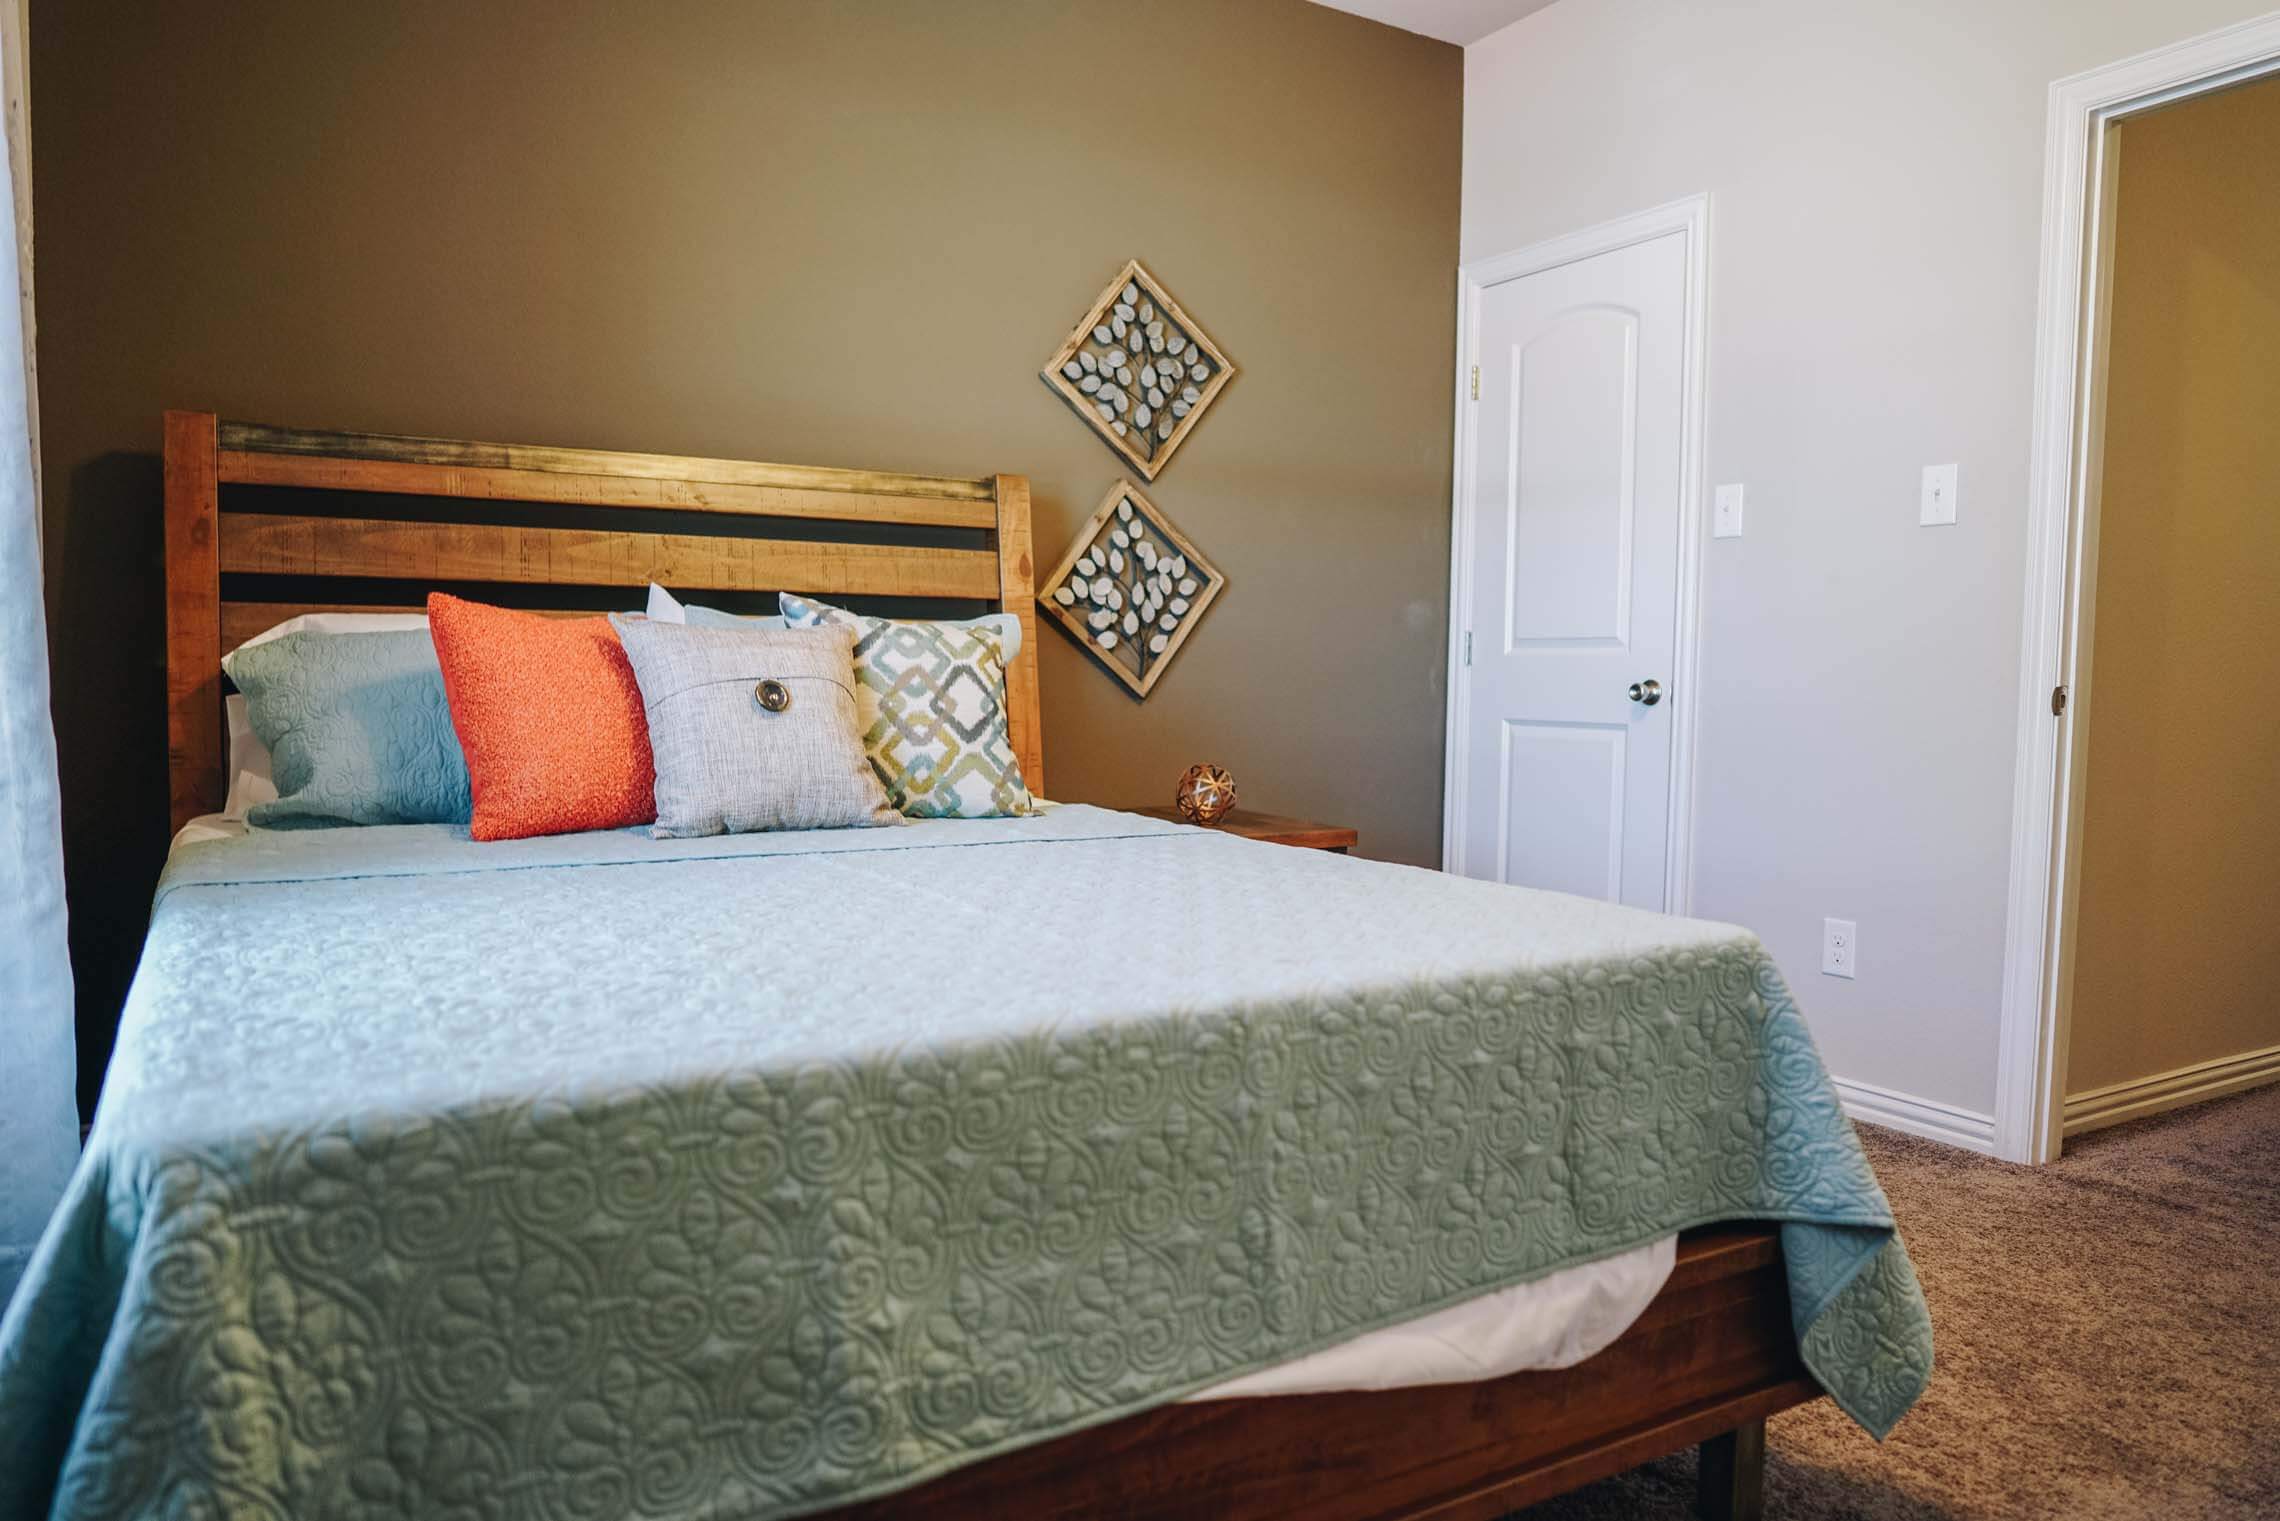 a picture of one of the bedrooms in the durango townhome